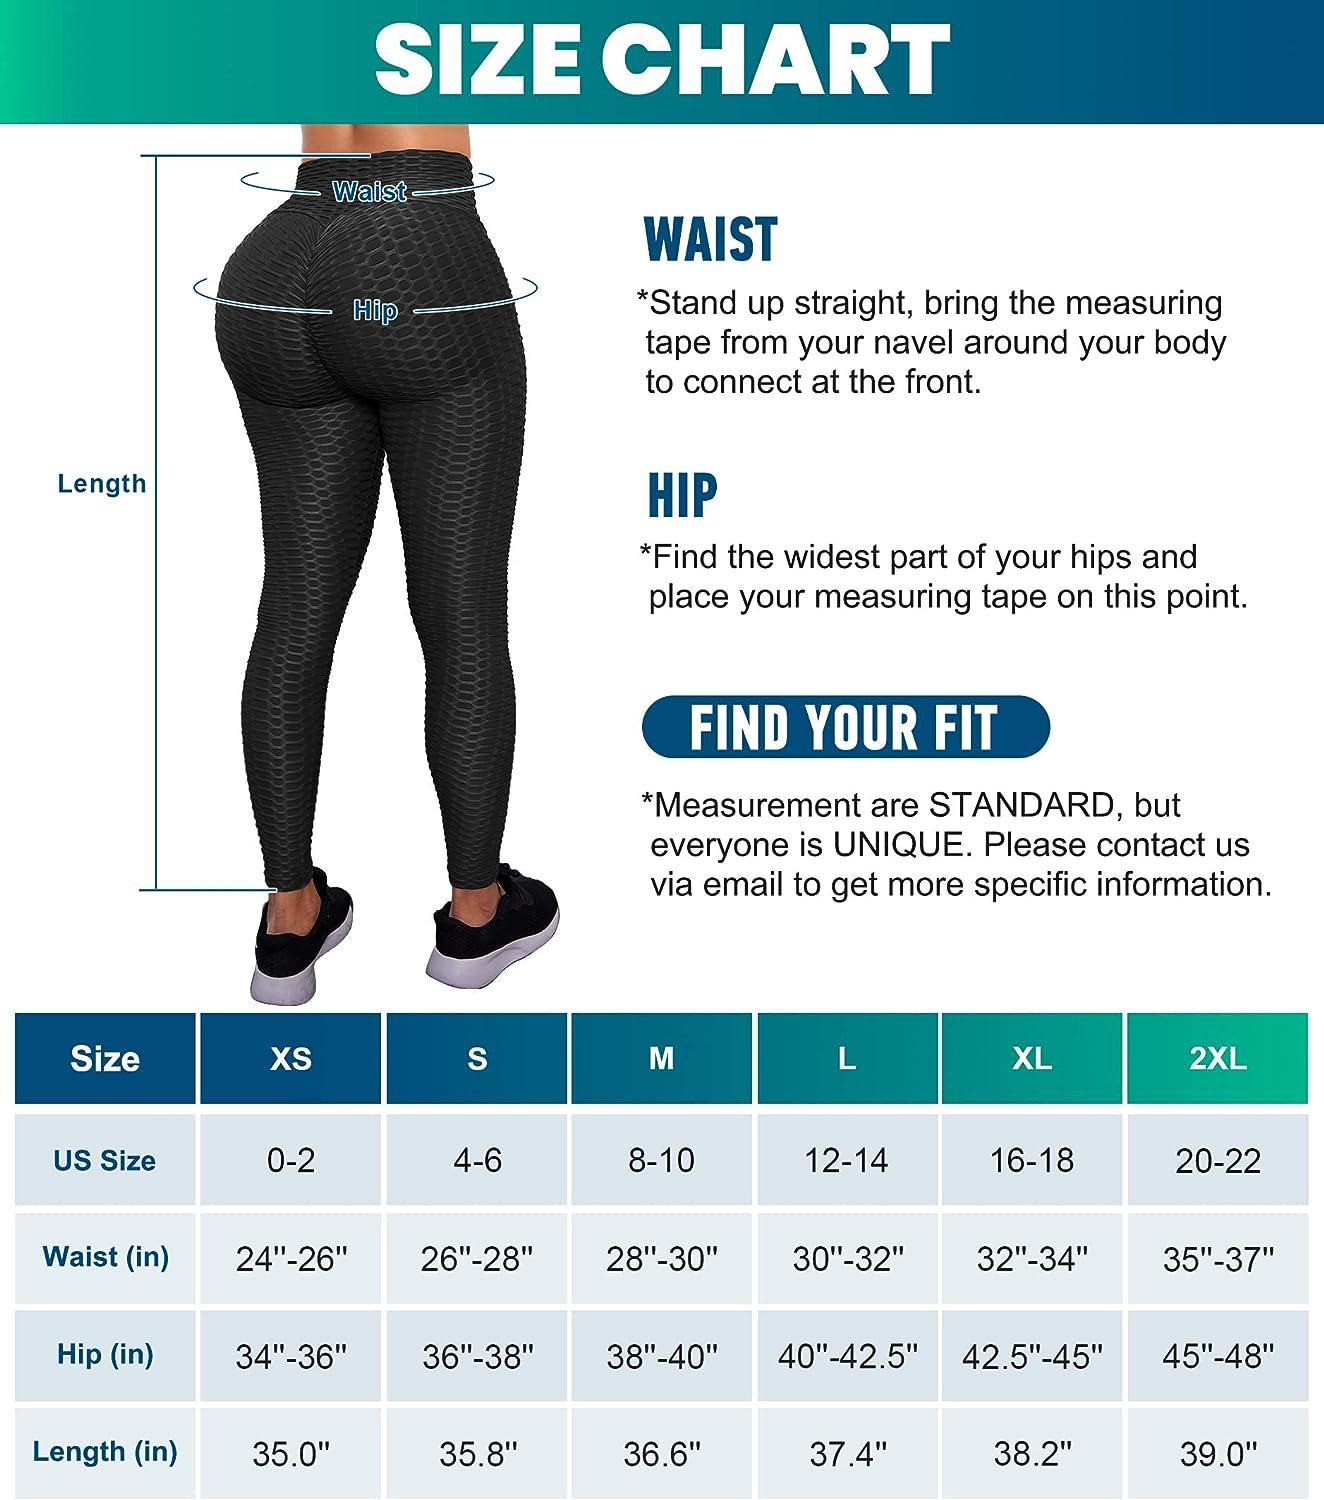  Five-Point Pocket TikTok Leggings, High Waist Yoga Pants for  Women, Booty Bubble Butt Lifting Workout Running Tights Gray : Clothing,  Shoes & Jewelry